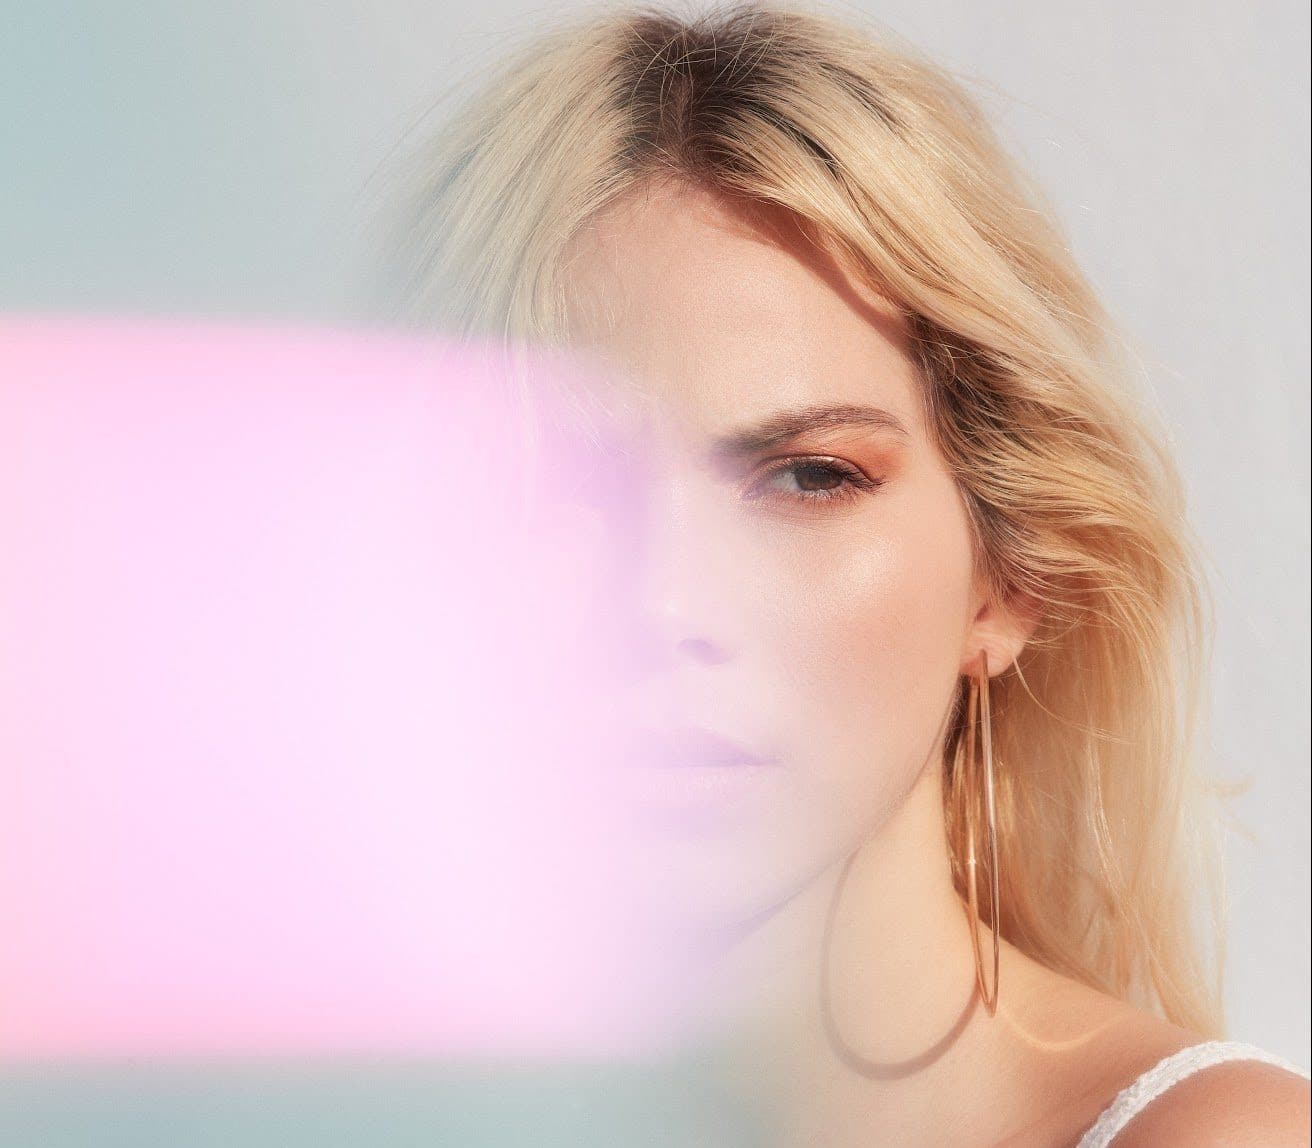 portrait-of-blonde-woman-with-pink-lens-flare-covering-half-of-her-face